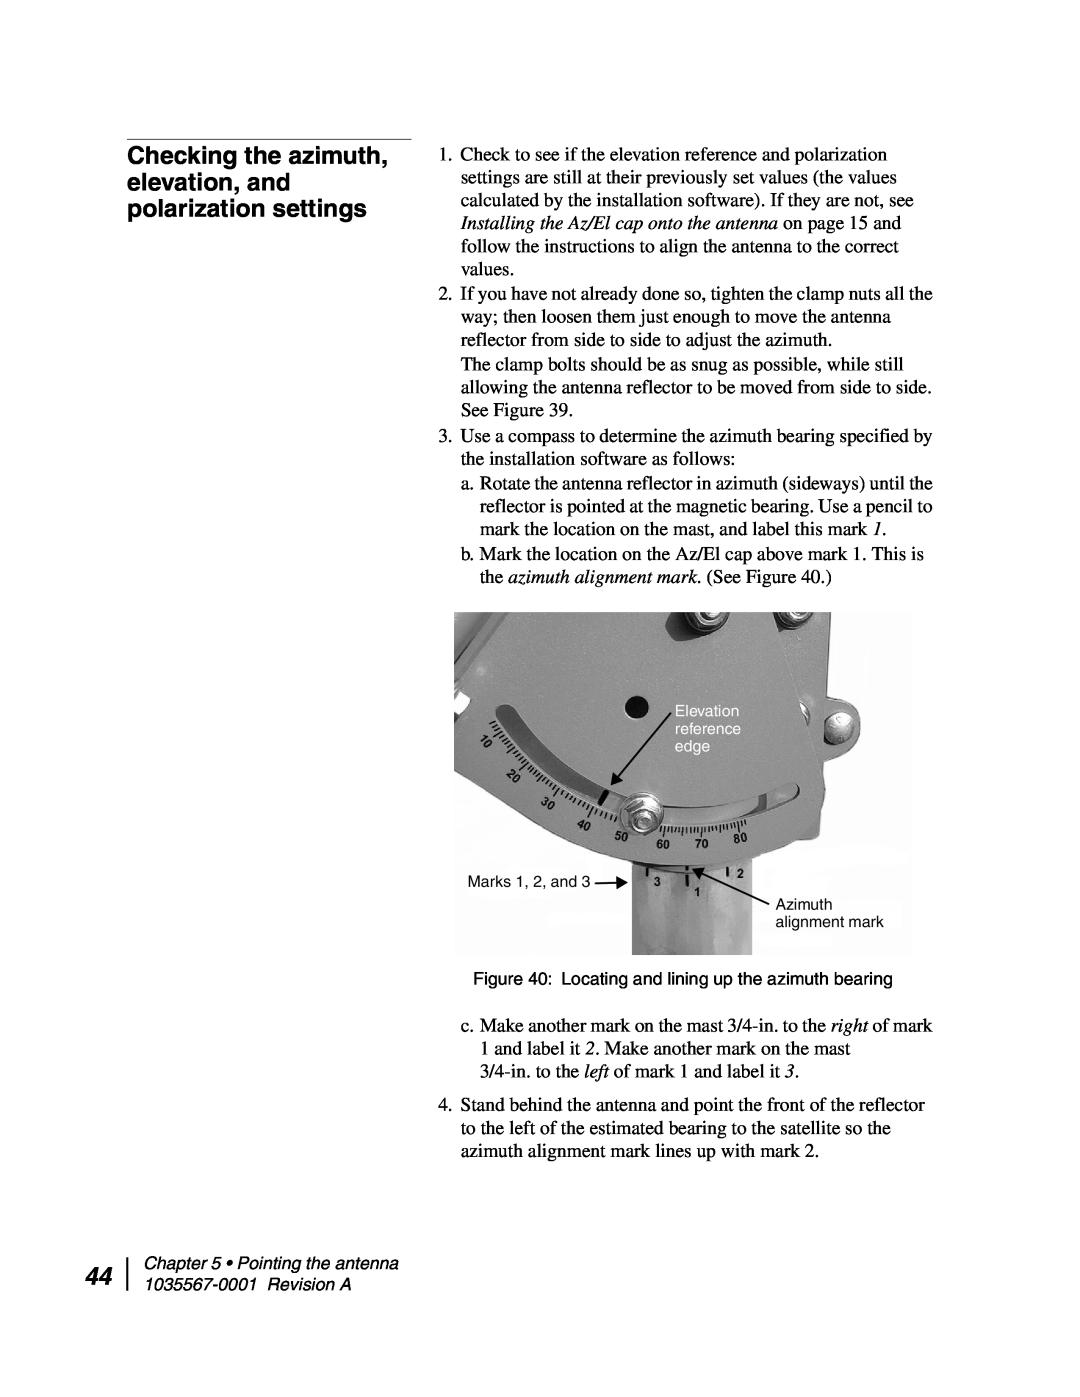 Hughes AN4-074-DF installation manual 3/4-in.to the left of mark 1 and label it 